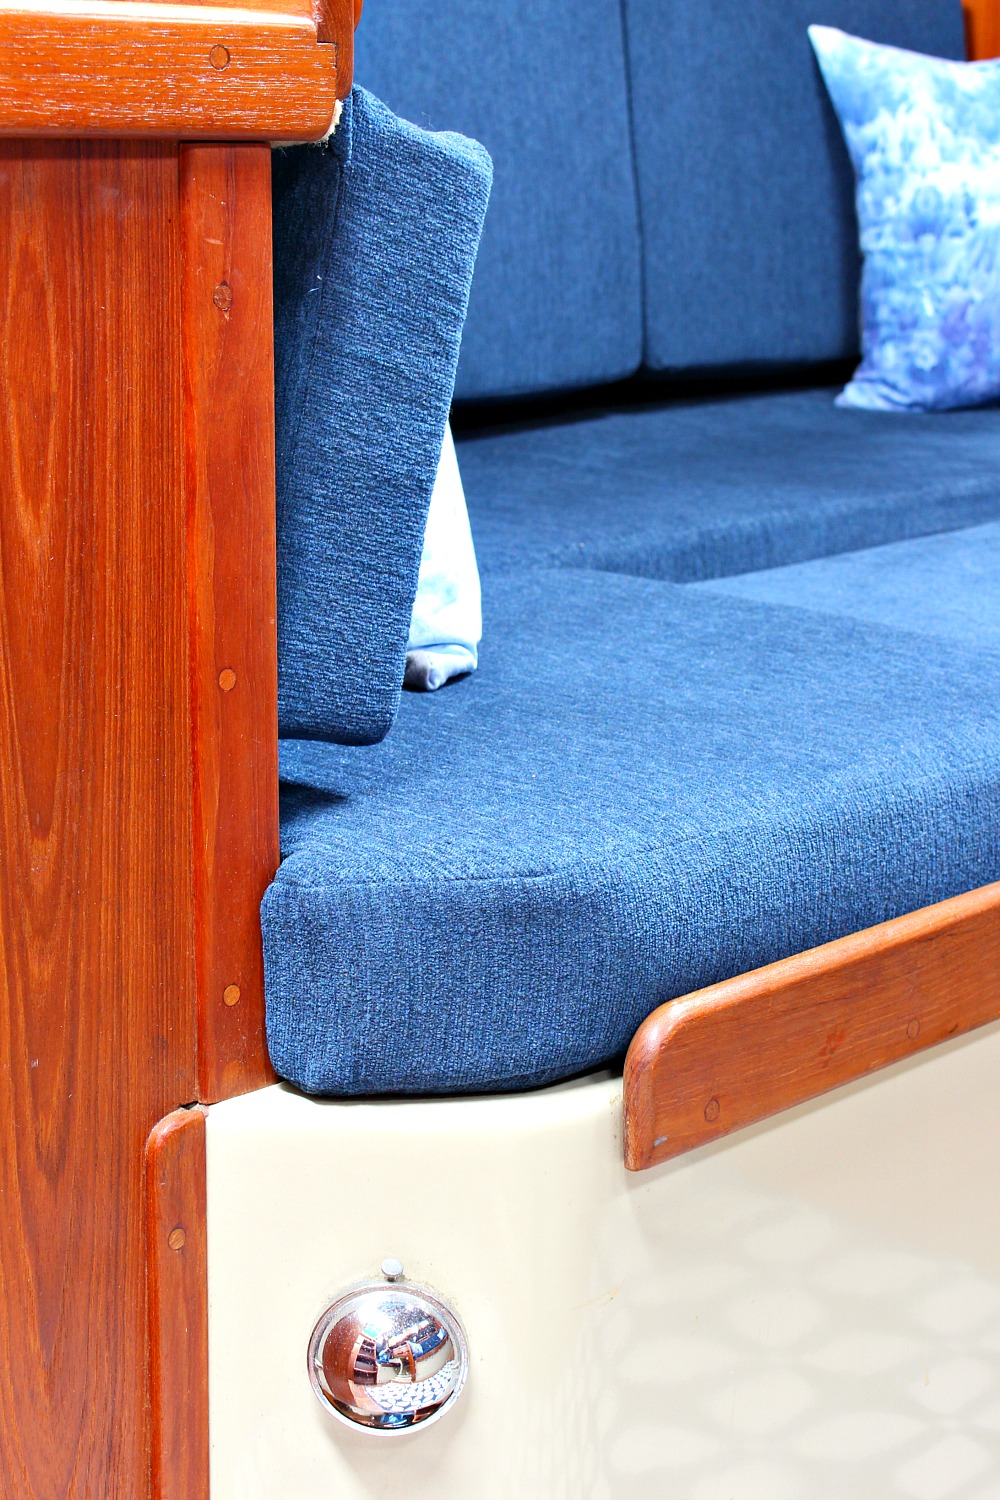 Tour the Before and After of This Updated Ticon 30 Sailboat Interior @danslelakehouse